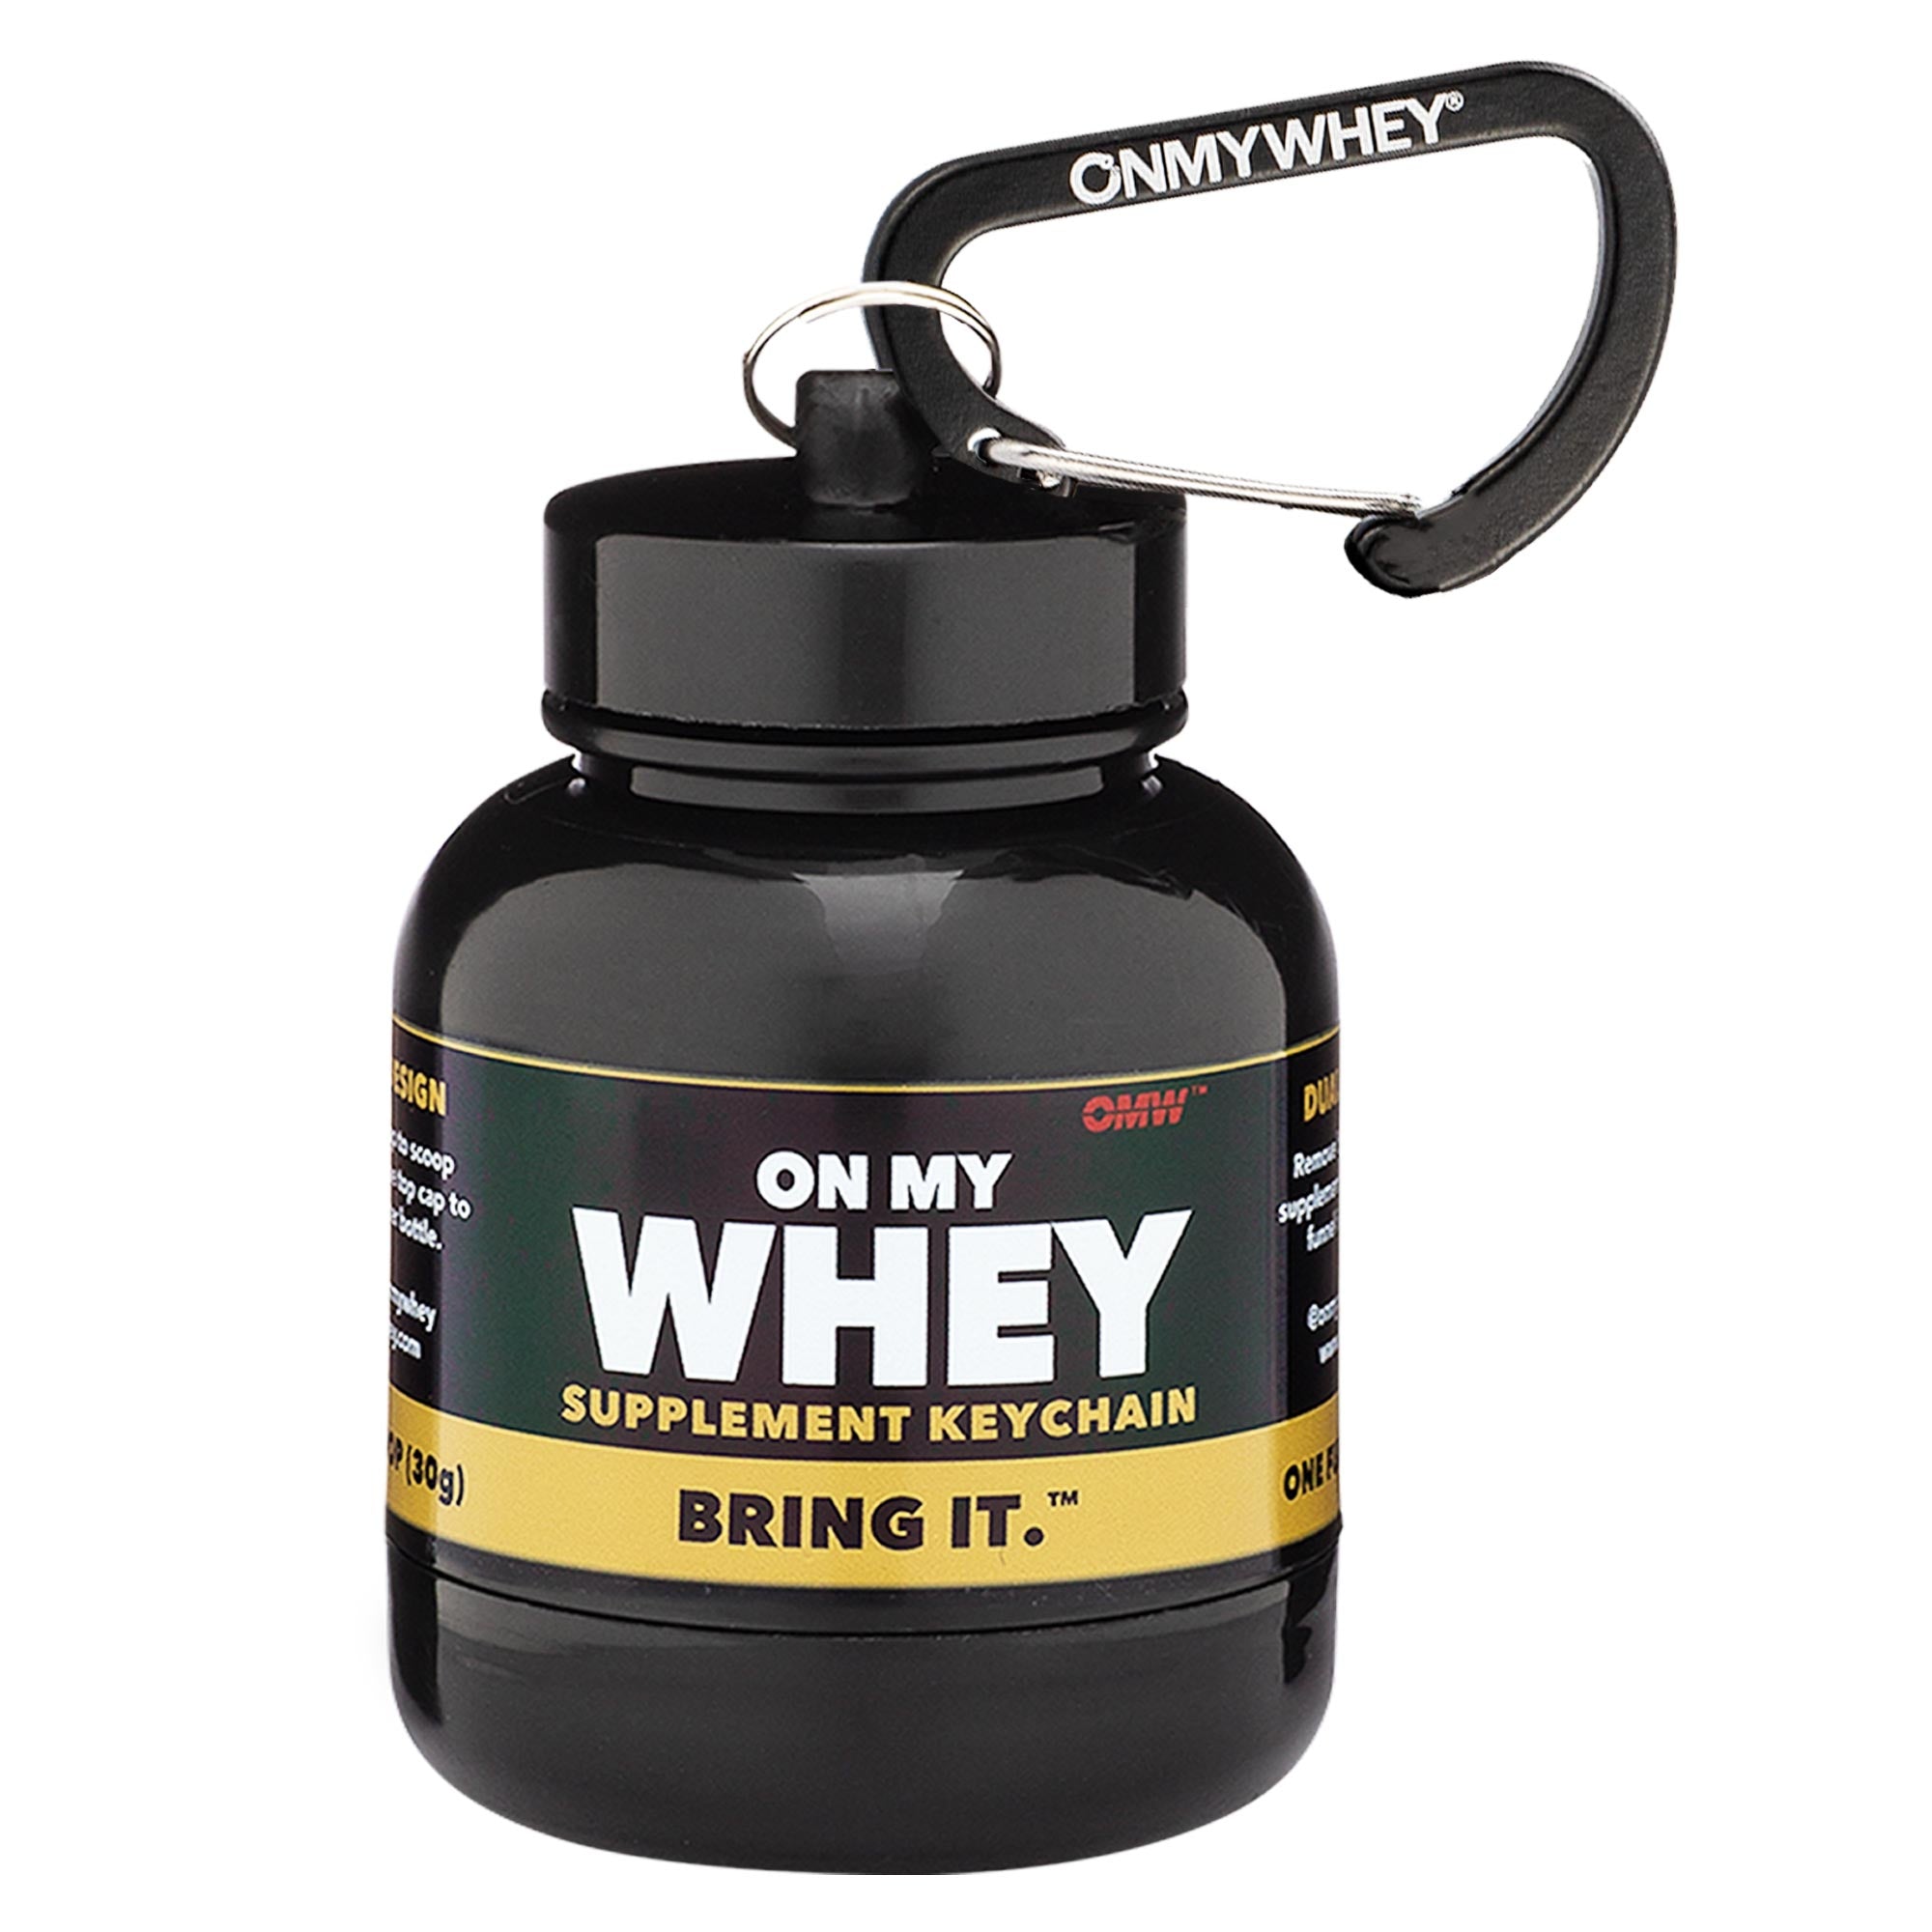  OnMyWhey - Double Scoop (180cc) - Protein Powder and Supplement  Funnel Keychain 3-Pack : Health & Household